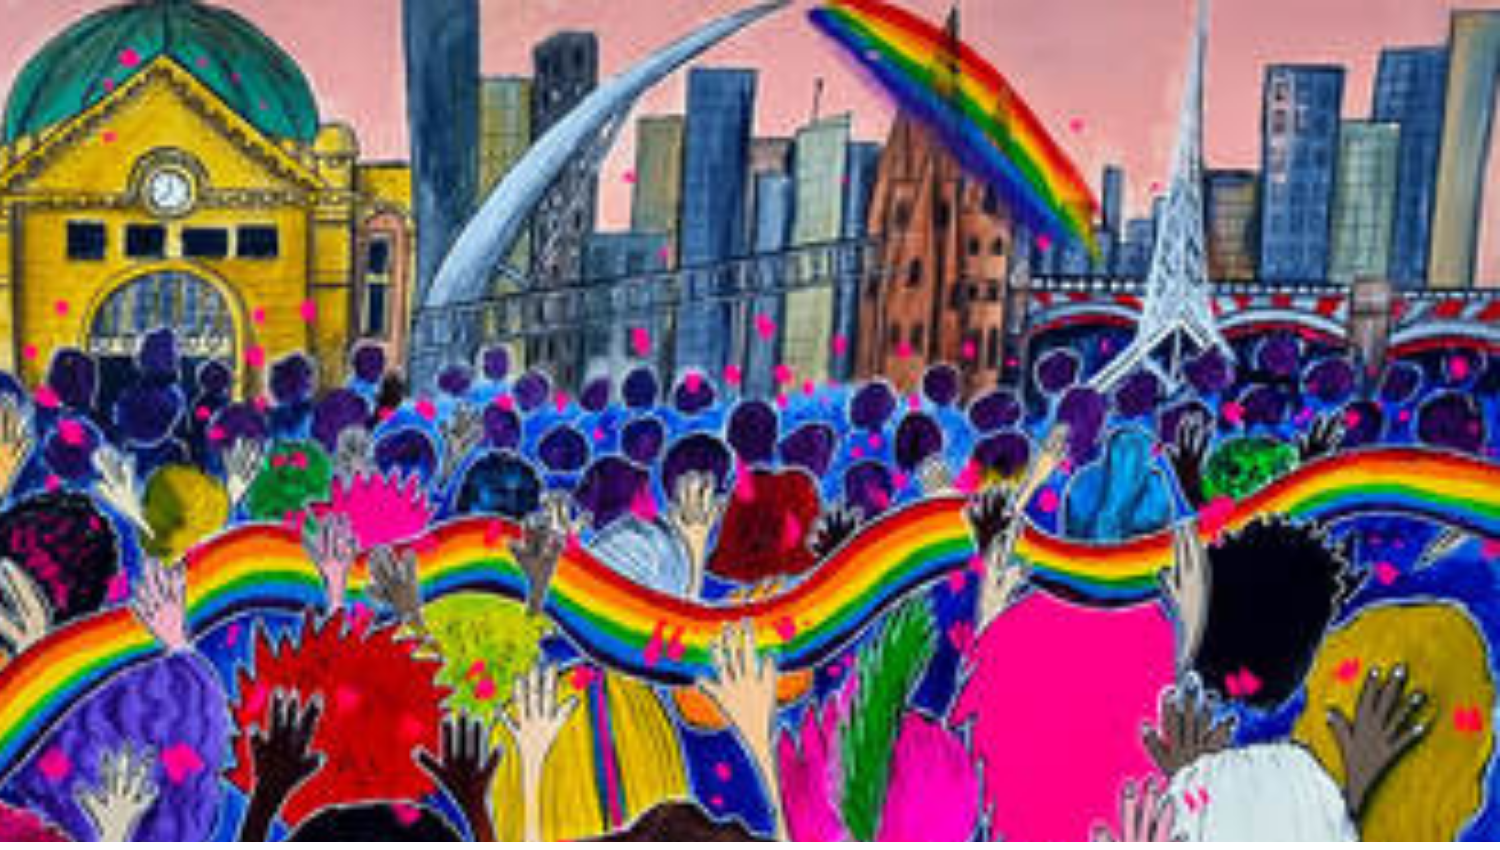 Artwork of a crowd of people with their hands in the air. In the distance is the Flinders St Railway station. There is a rainbow ribbon flowing over the crowd.